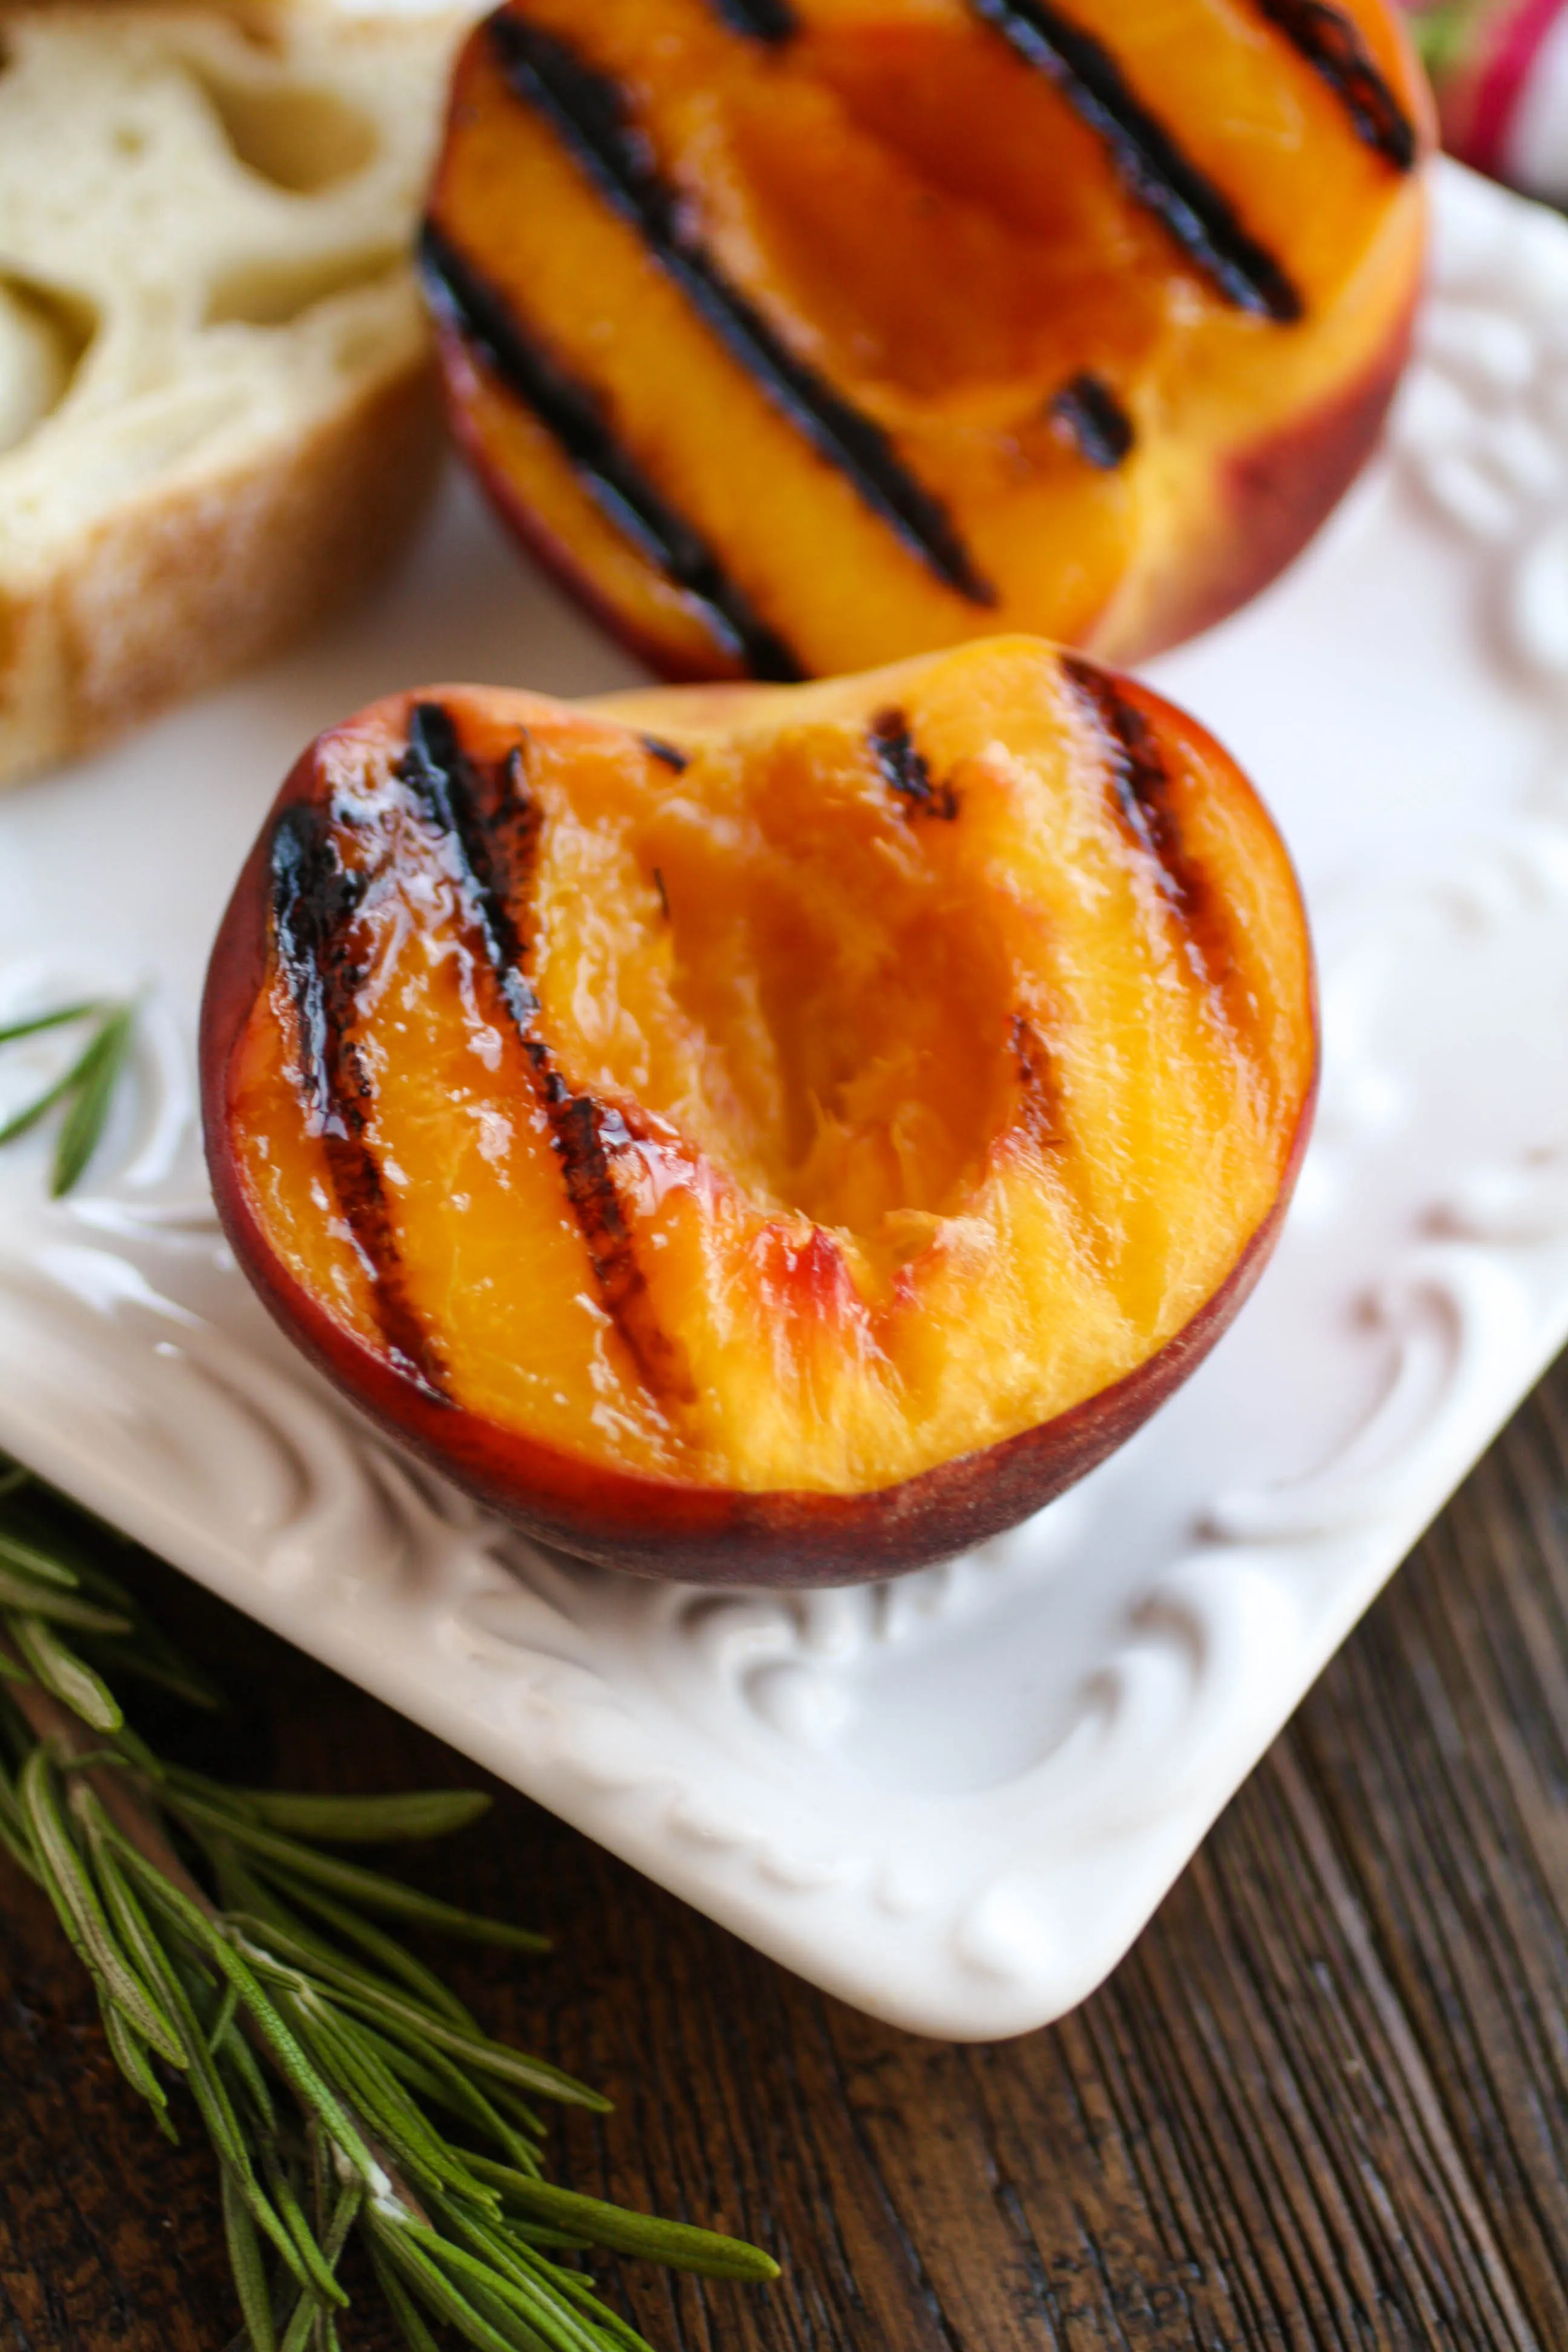 Rosemary Whipped Feta with Grilled Peaches and Honey is a fun party treat! This appetizer will steal the show!